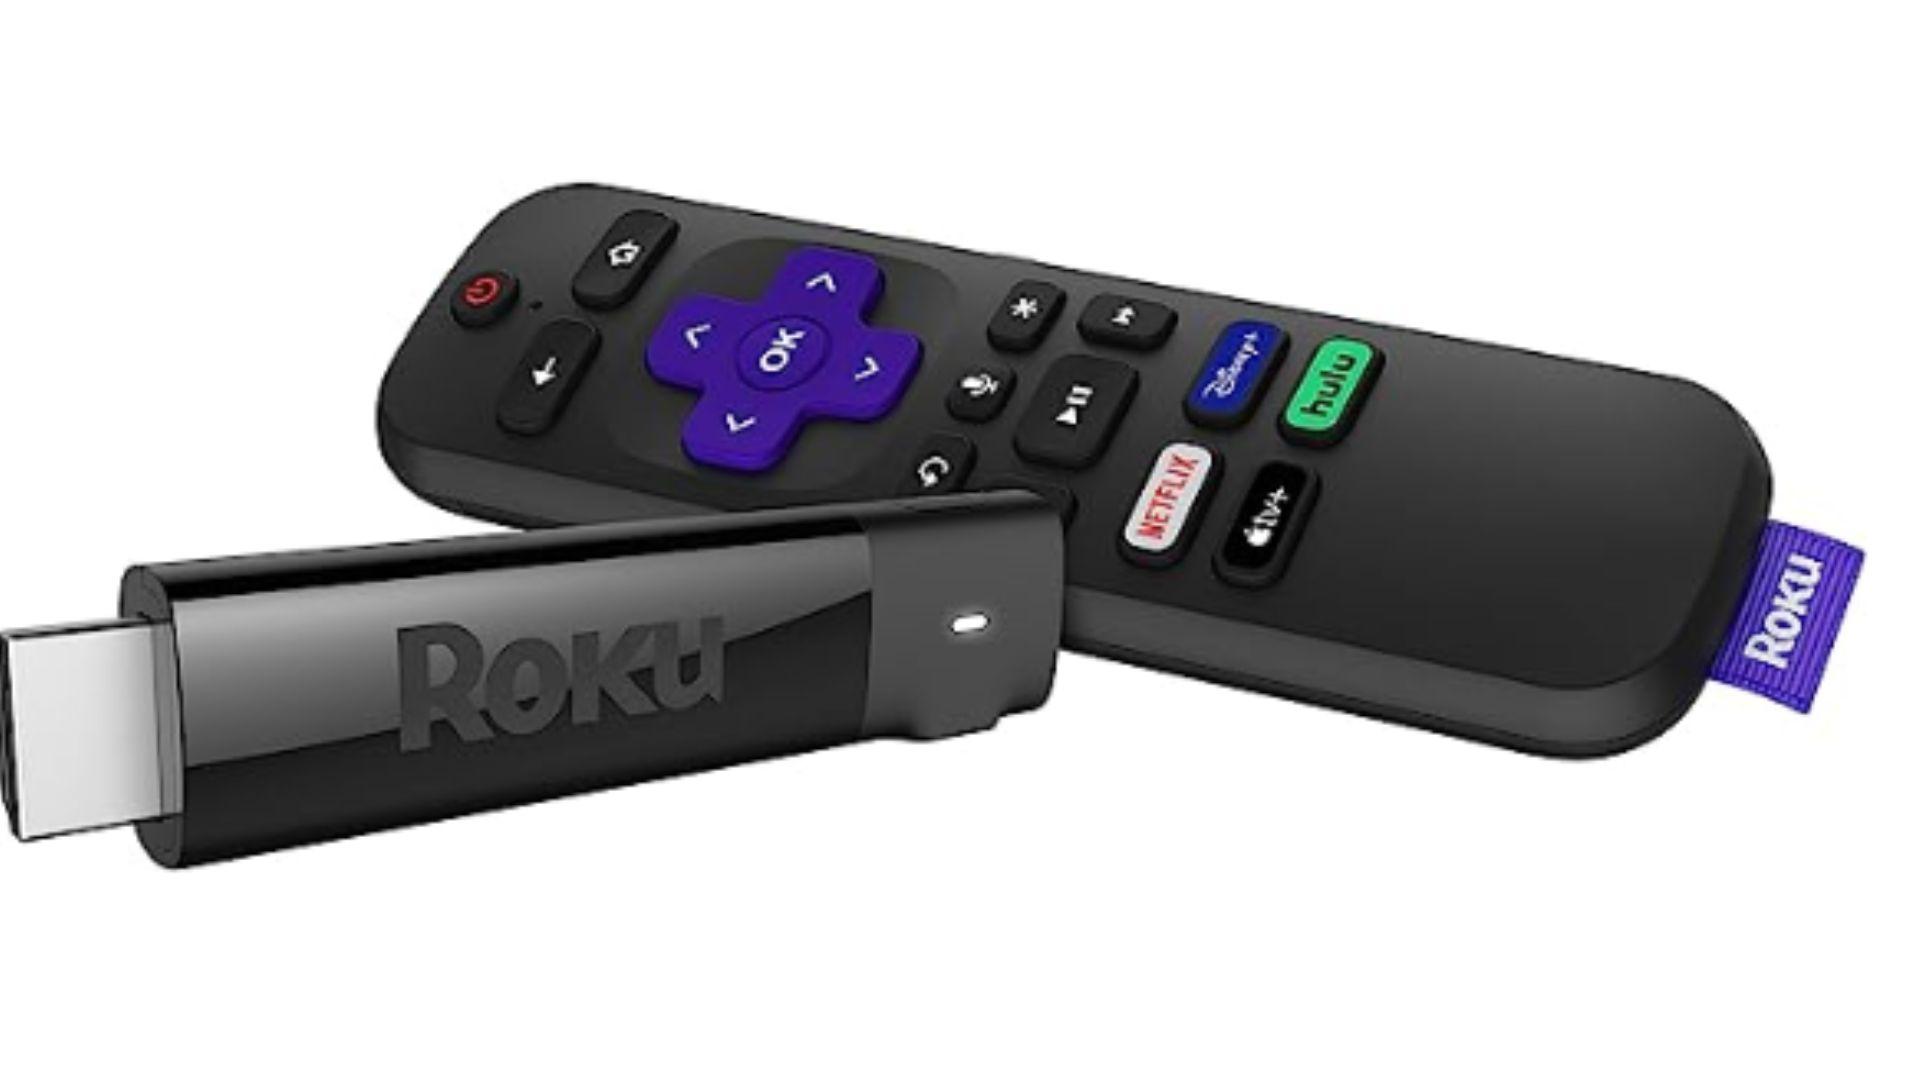 What is a Roku Stick?